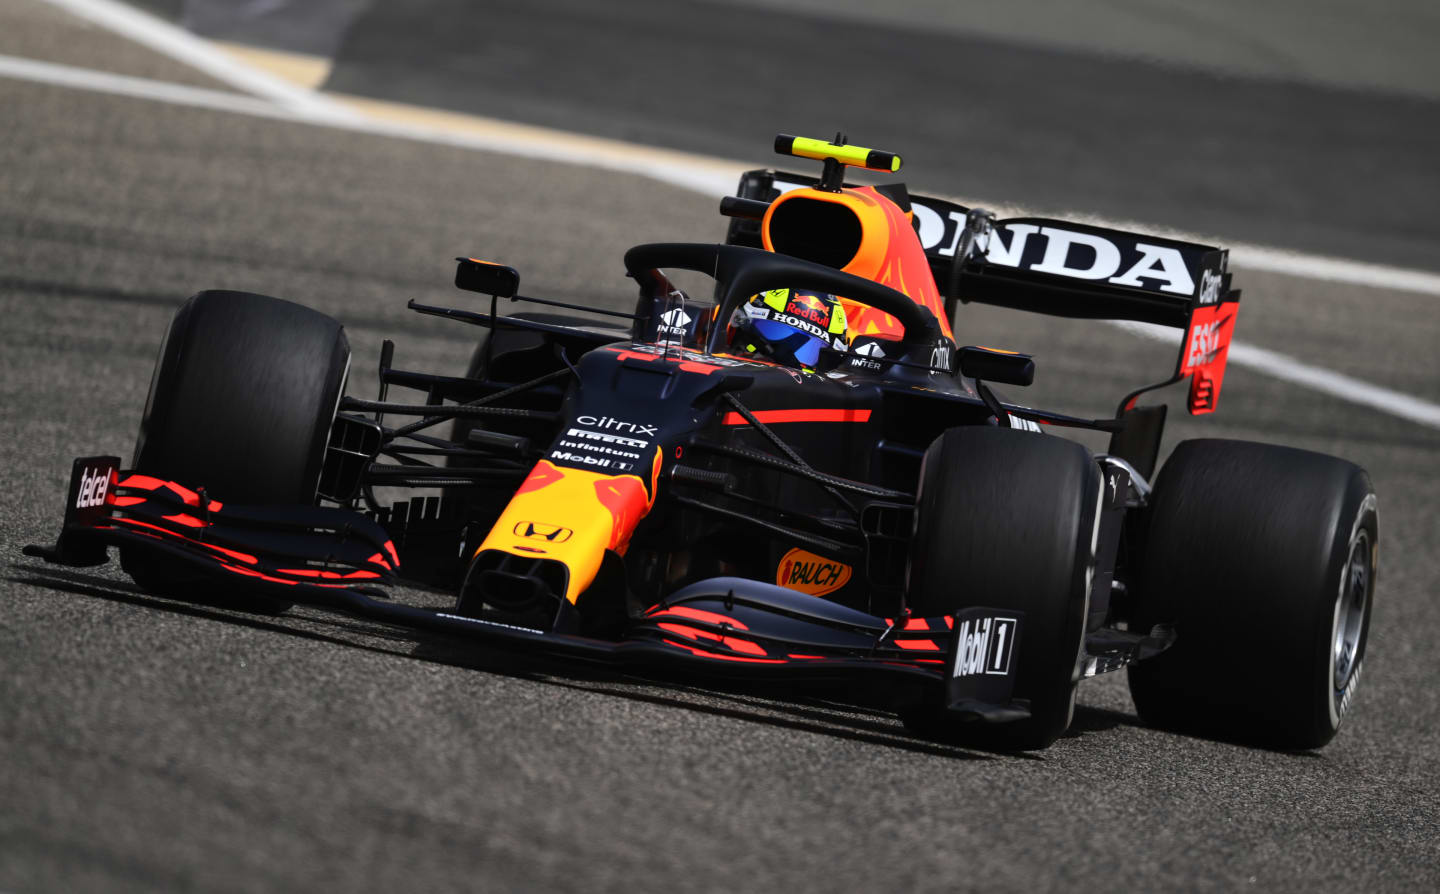 Perez out on track in the RB16B